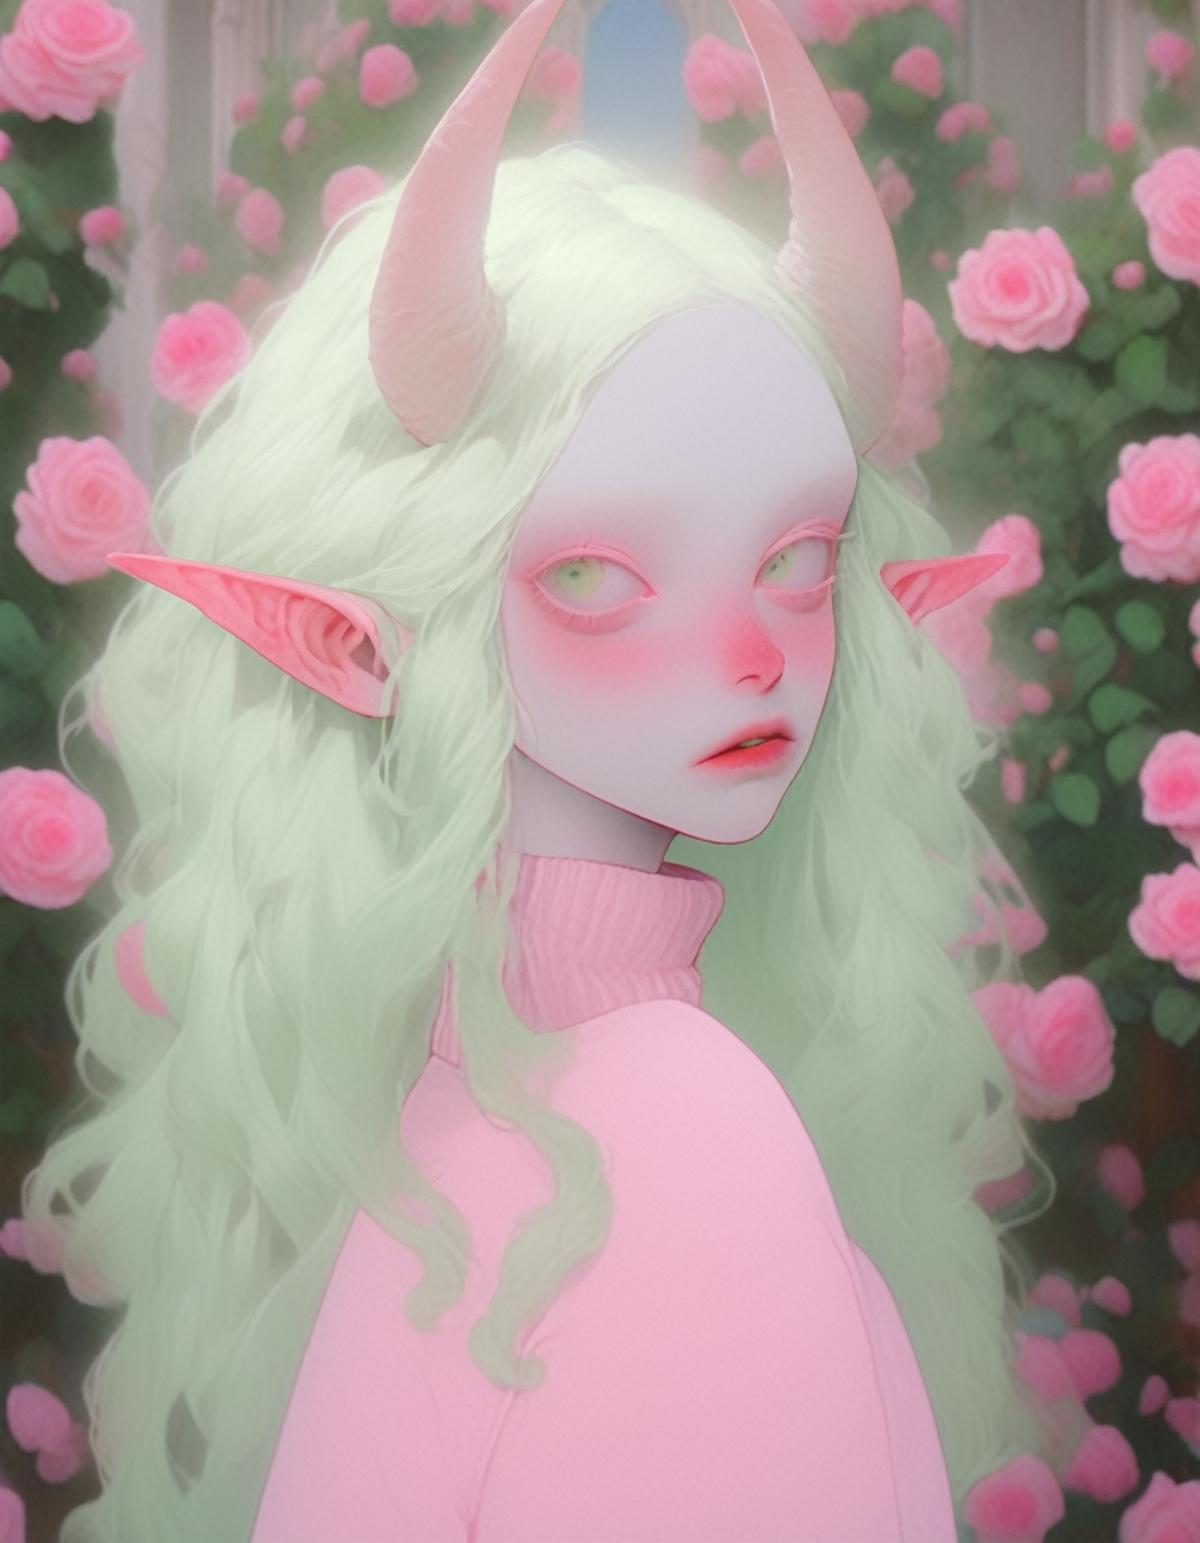 albino demon girl standing with ( green curls hair:1.3) , walking through pink rose bushes and castle in the distance, pin...